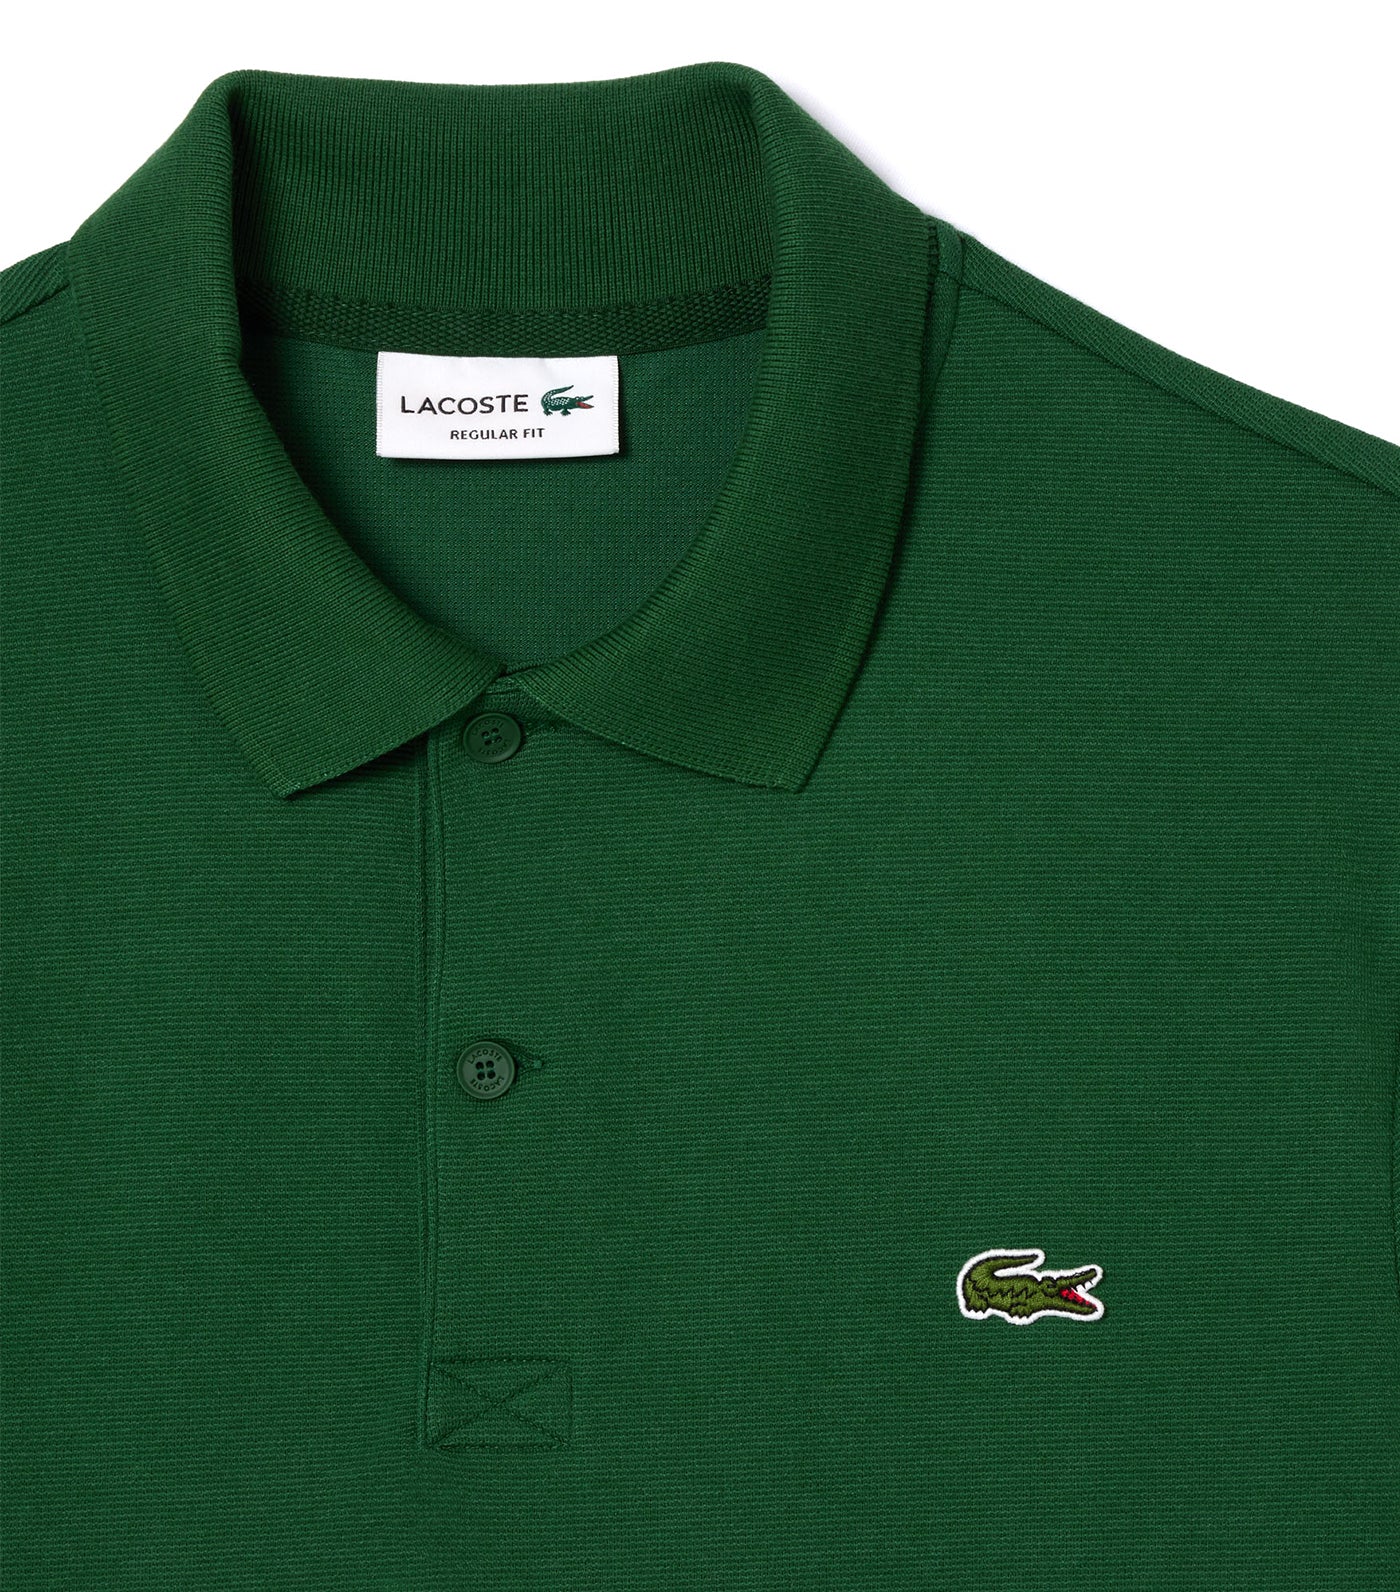 Lacoste Regular Fit Cotton Polo Shirt Green